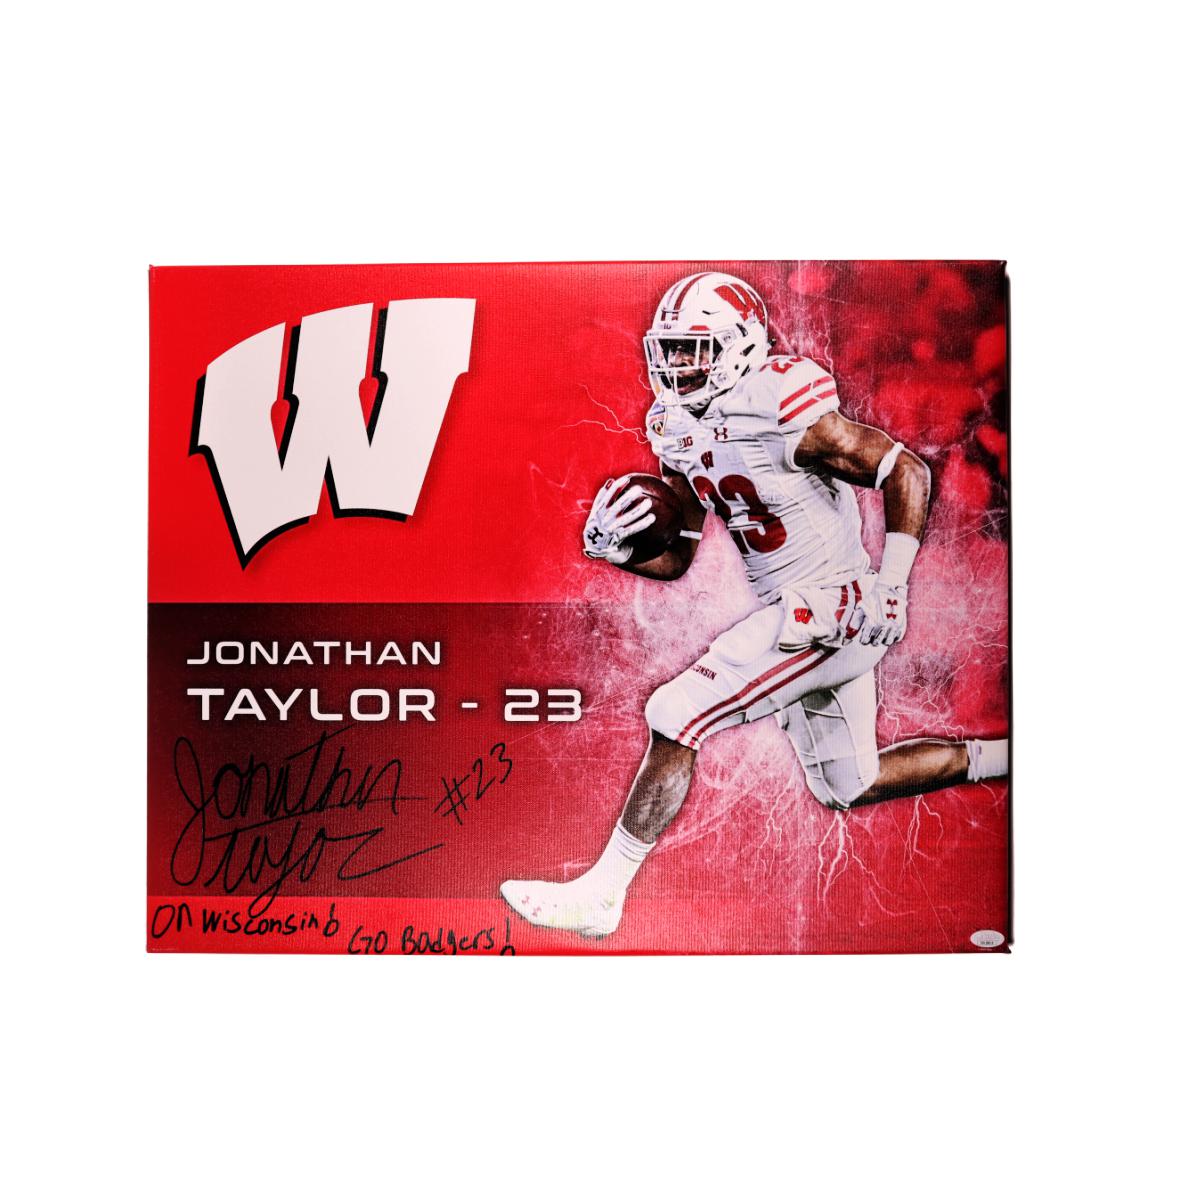 Jonathan Taylor Signed 20x24 Stretched Canvas Wisconsin Autographed JSA COA 3